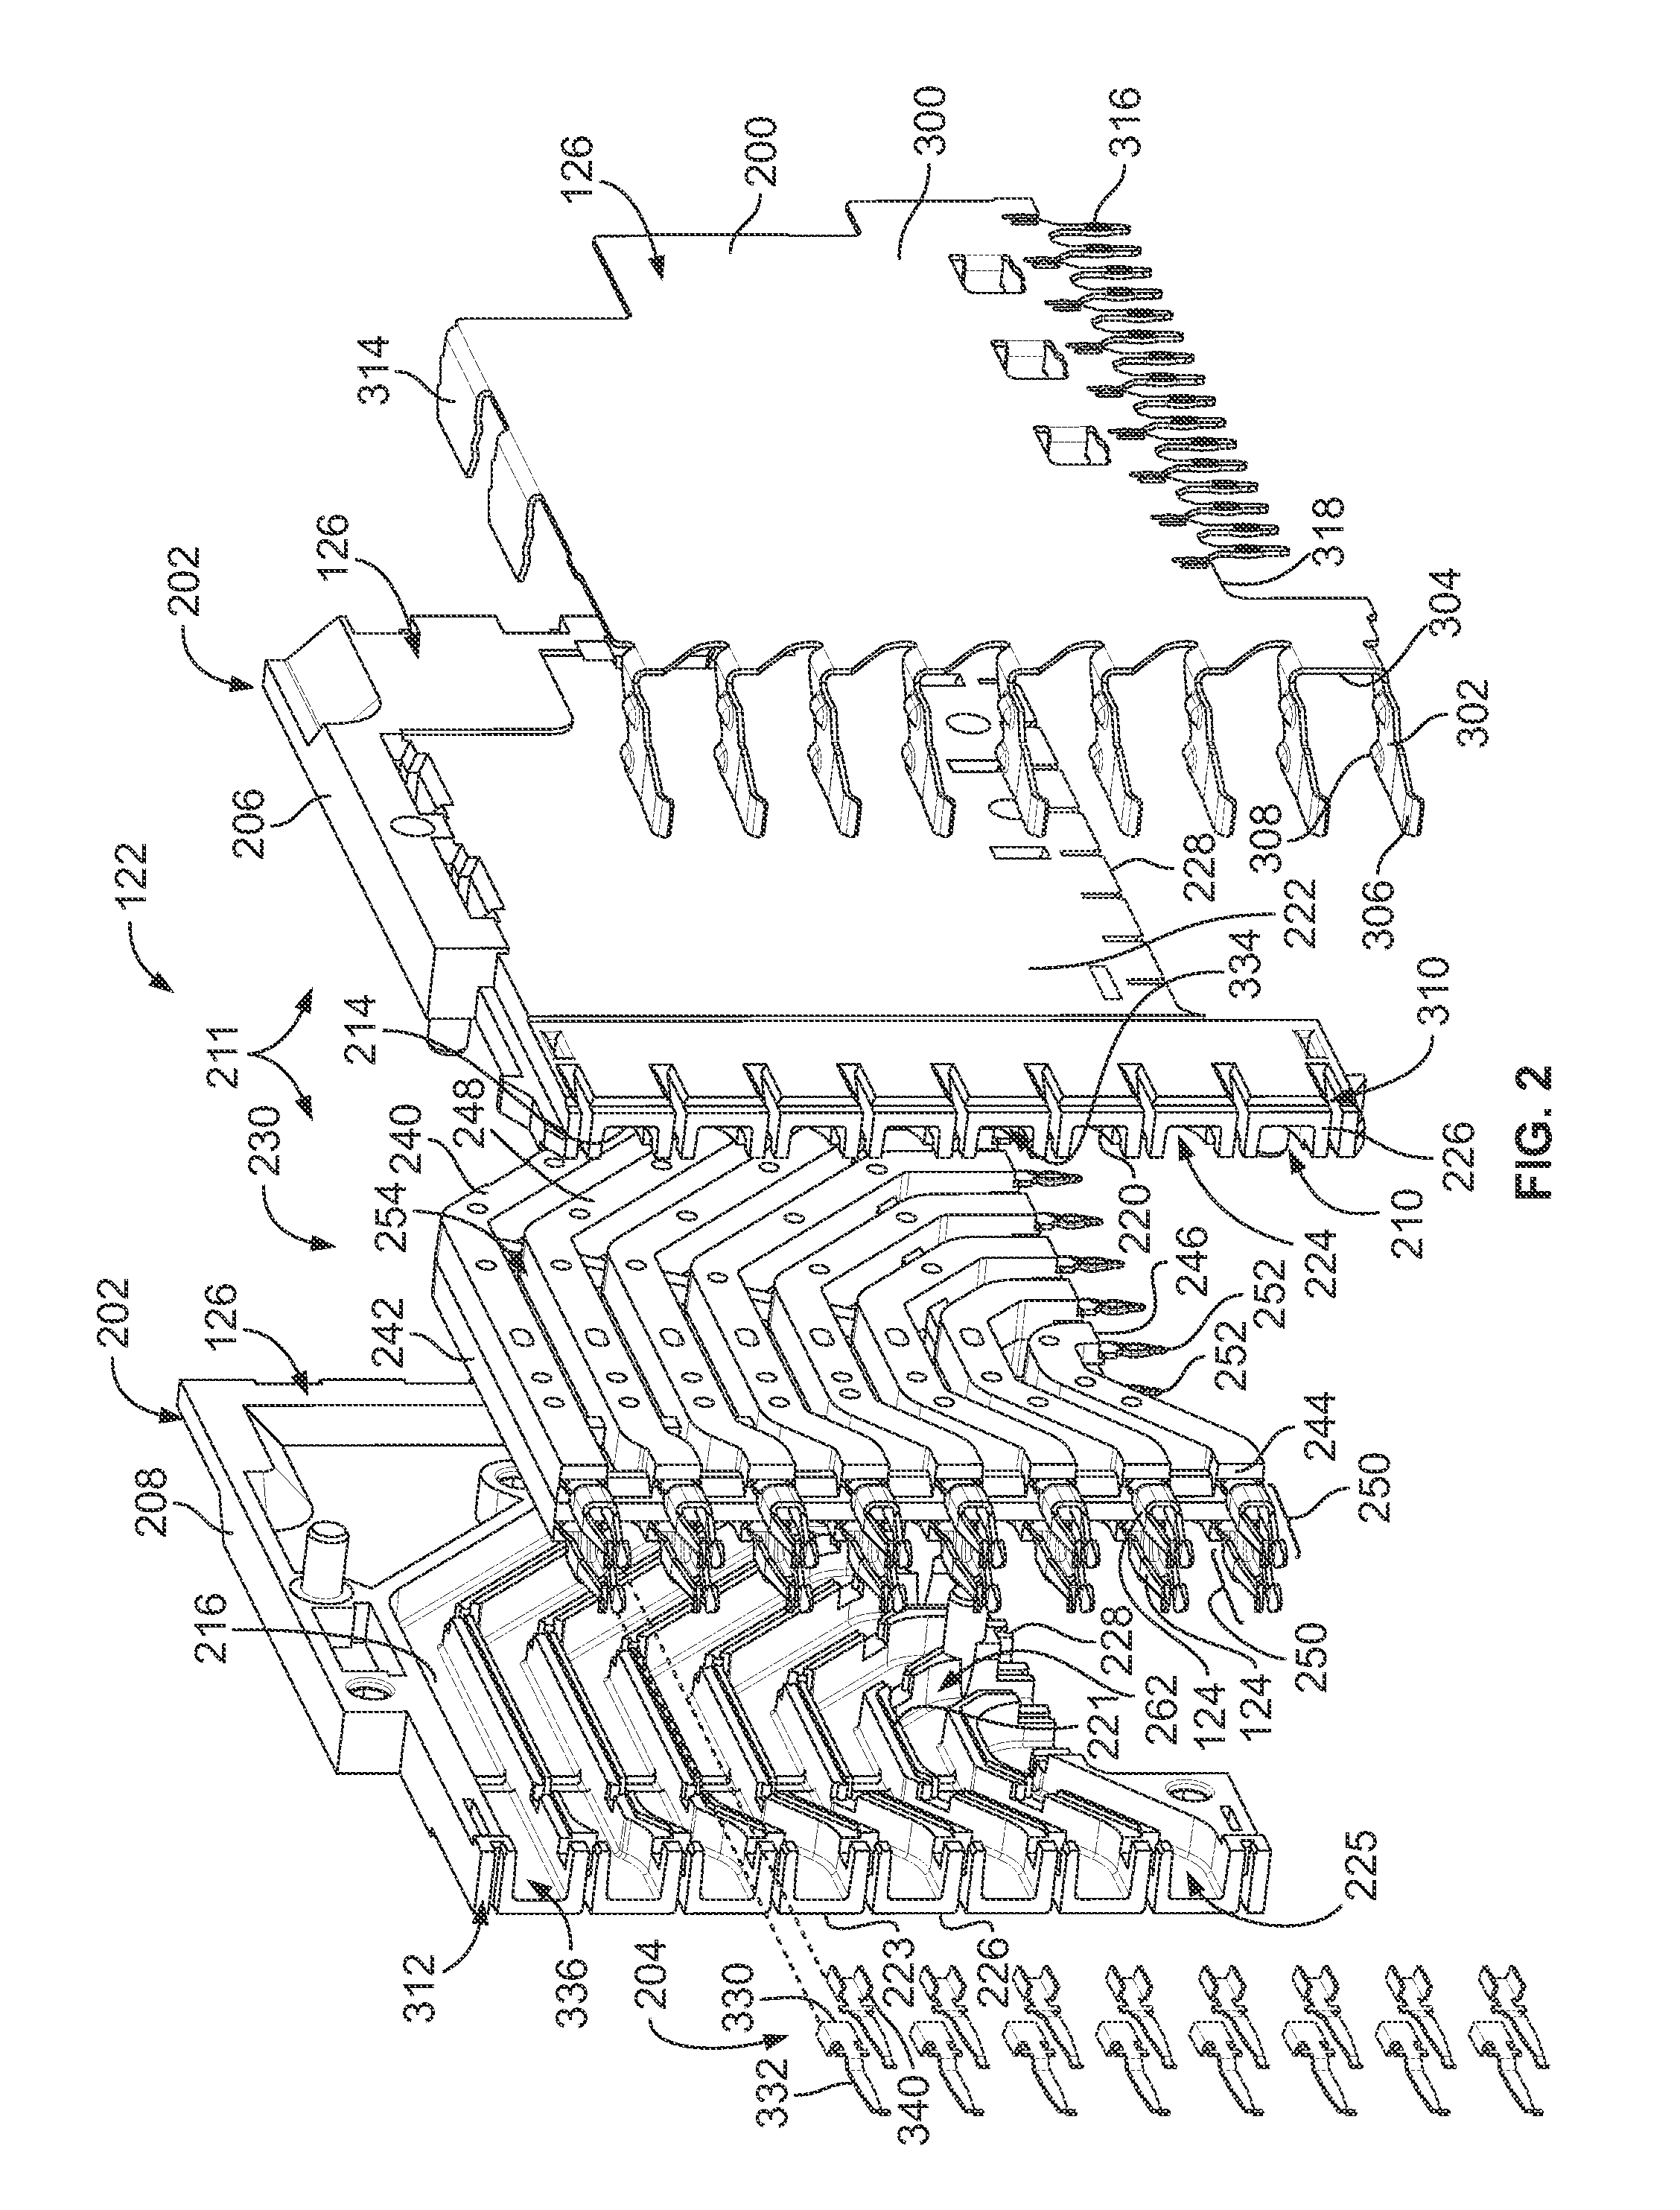 Grounding structures for header and receptacle assemblies